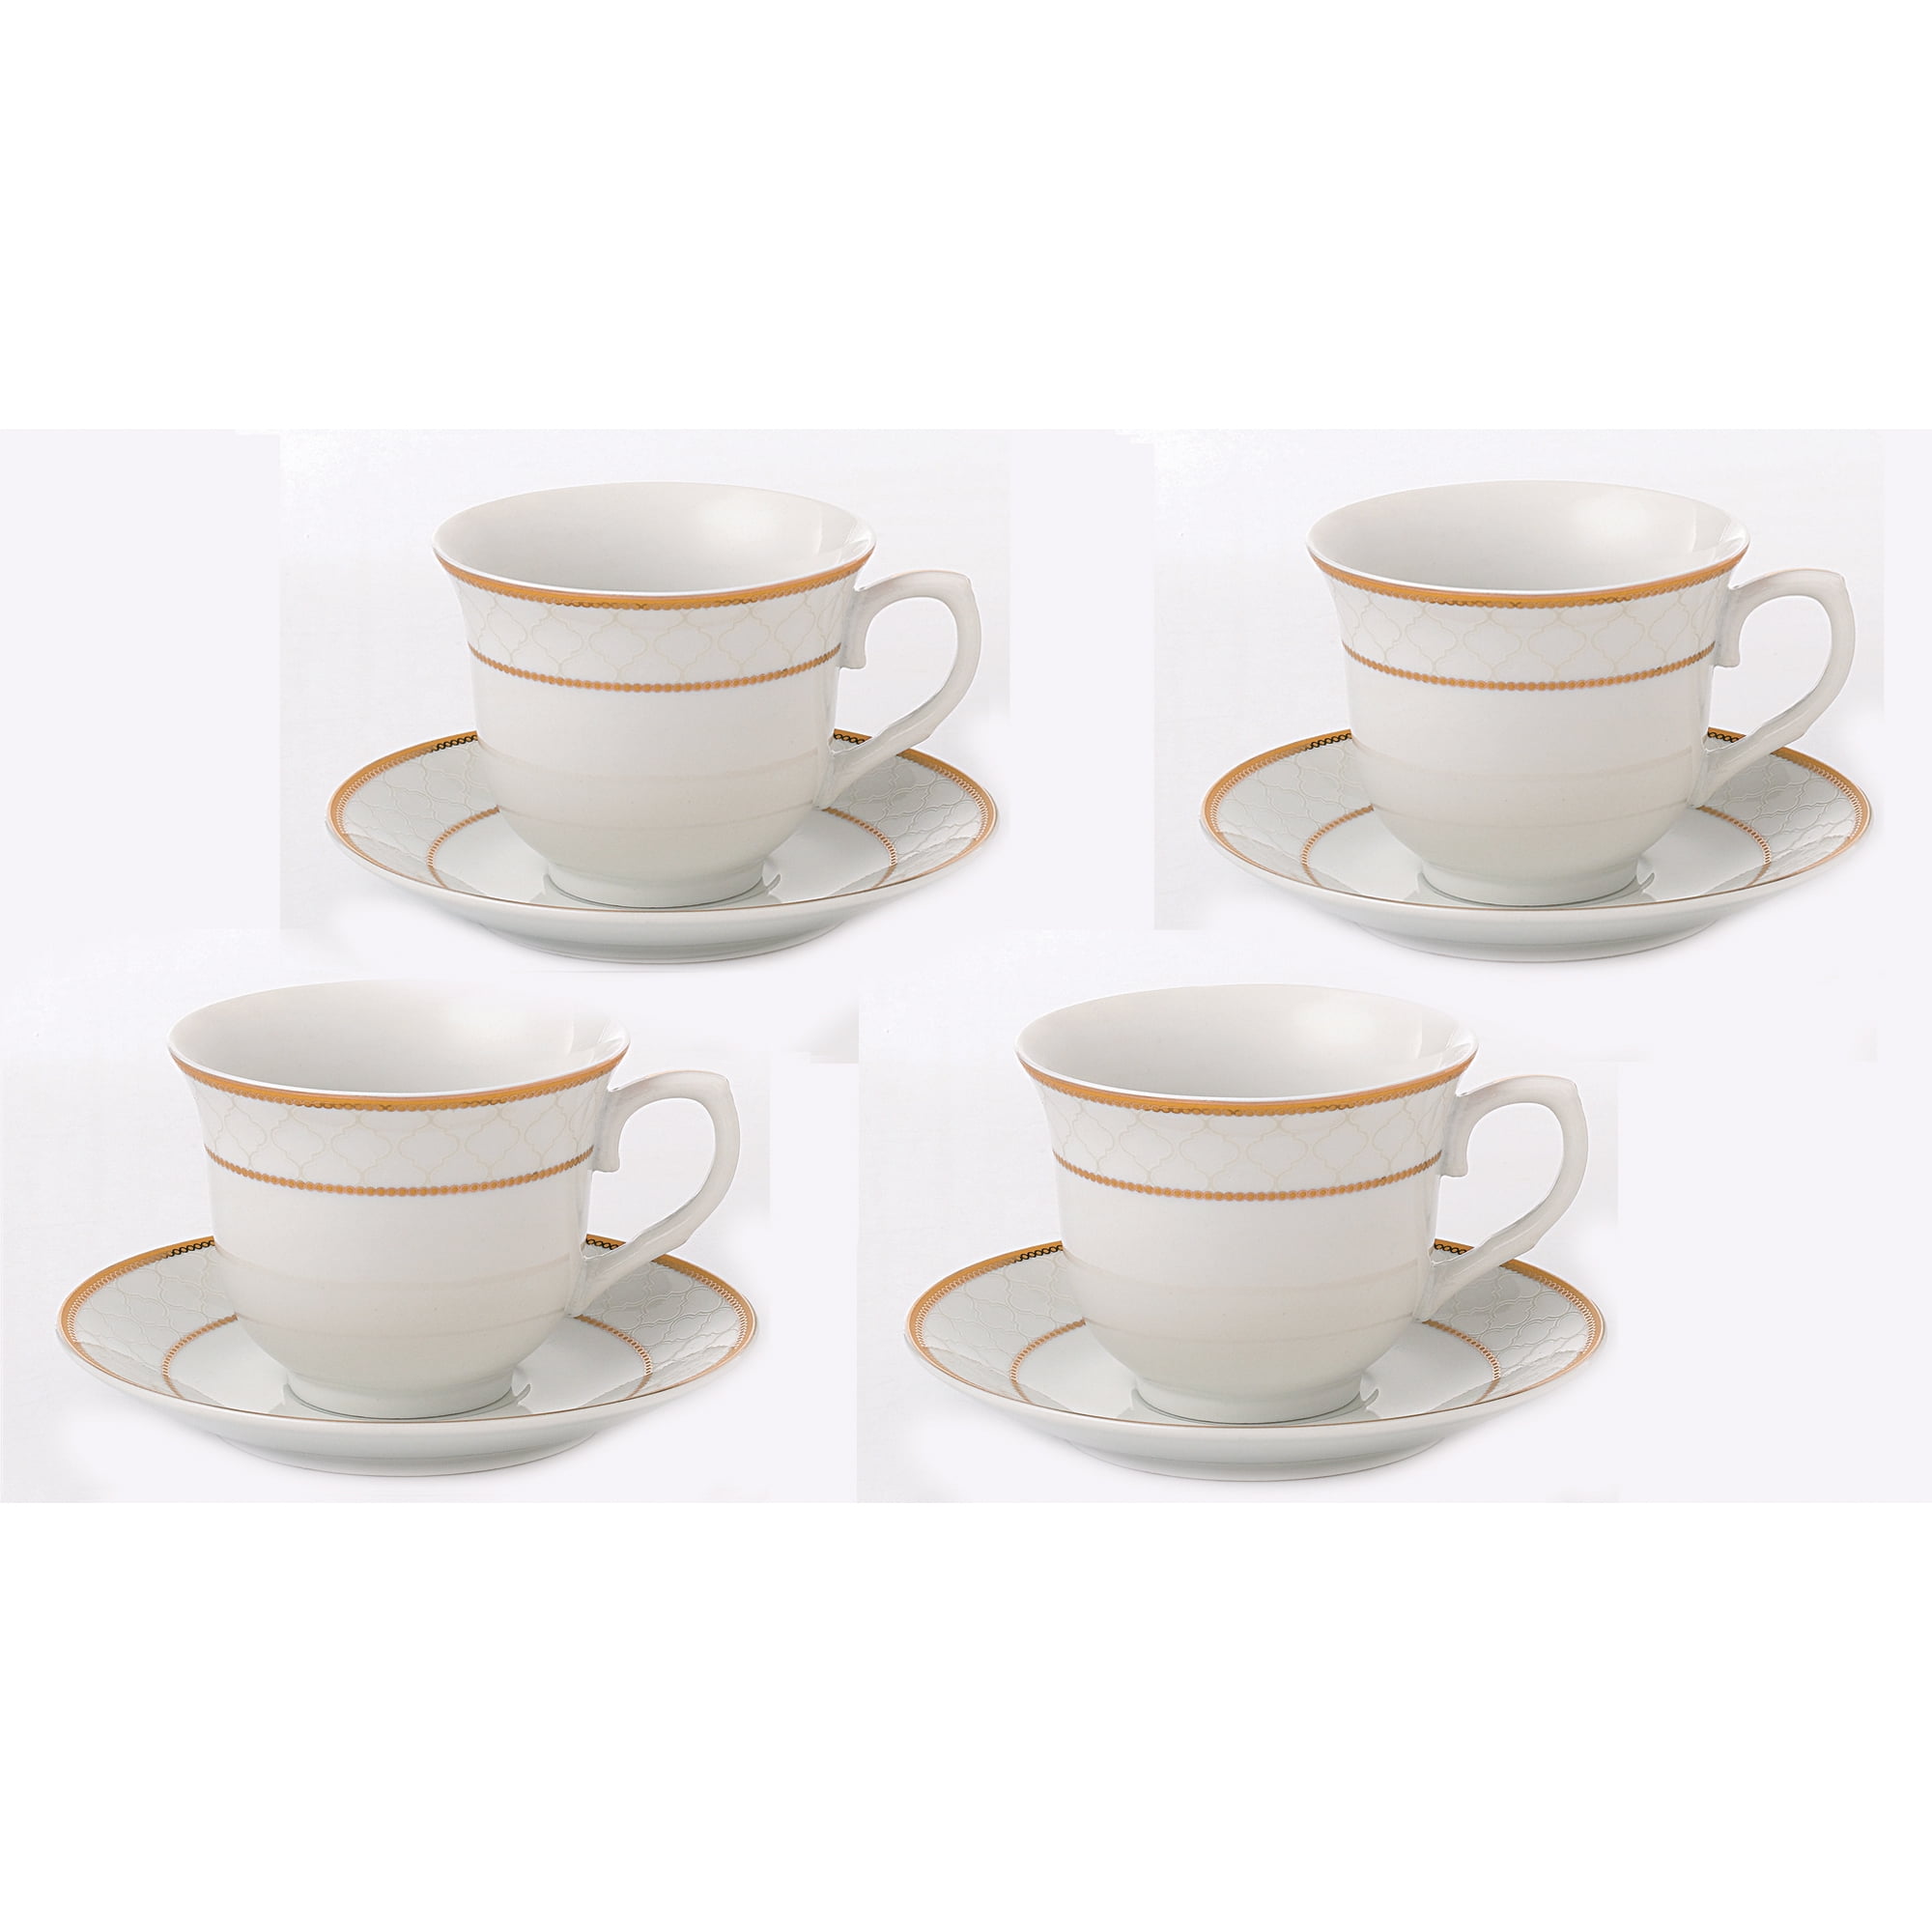 SooMILE 7oz Espresso Cups and Saucers Set Porcelain Coffee Mugs  Set of 4 for Cappuccino,Latte,Americano (Yellow): Cup & Saucer Sets